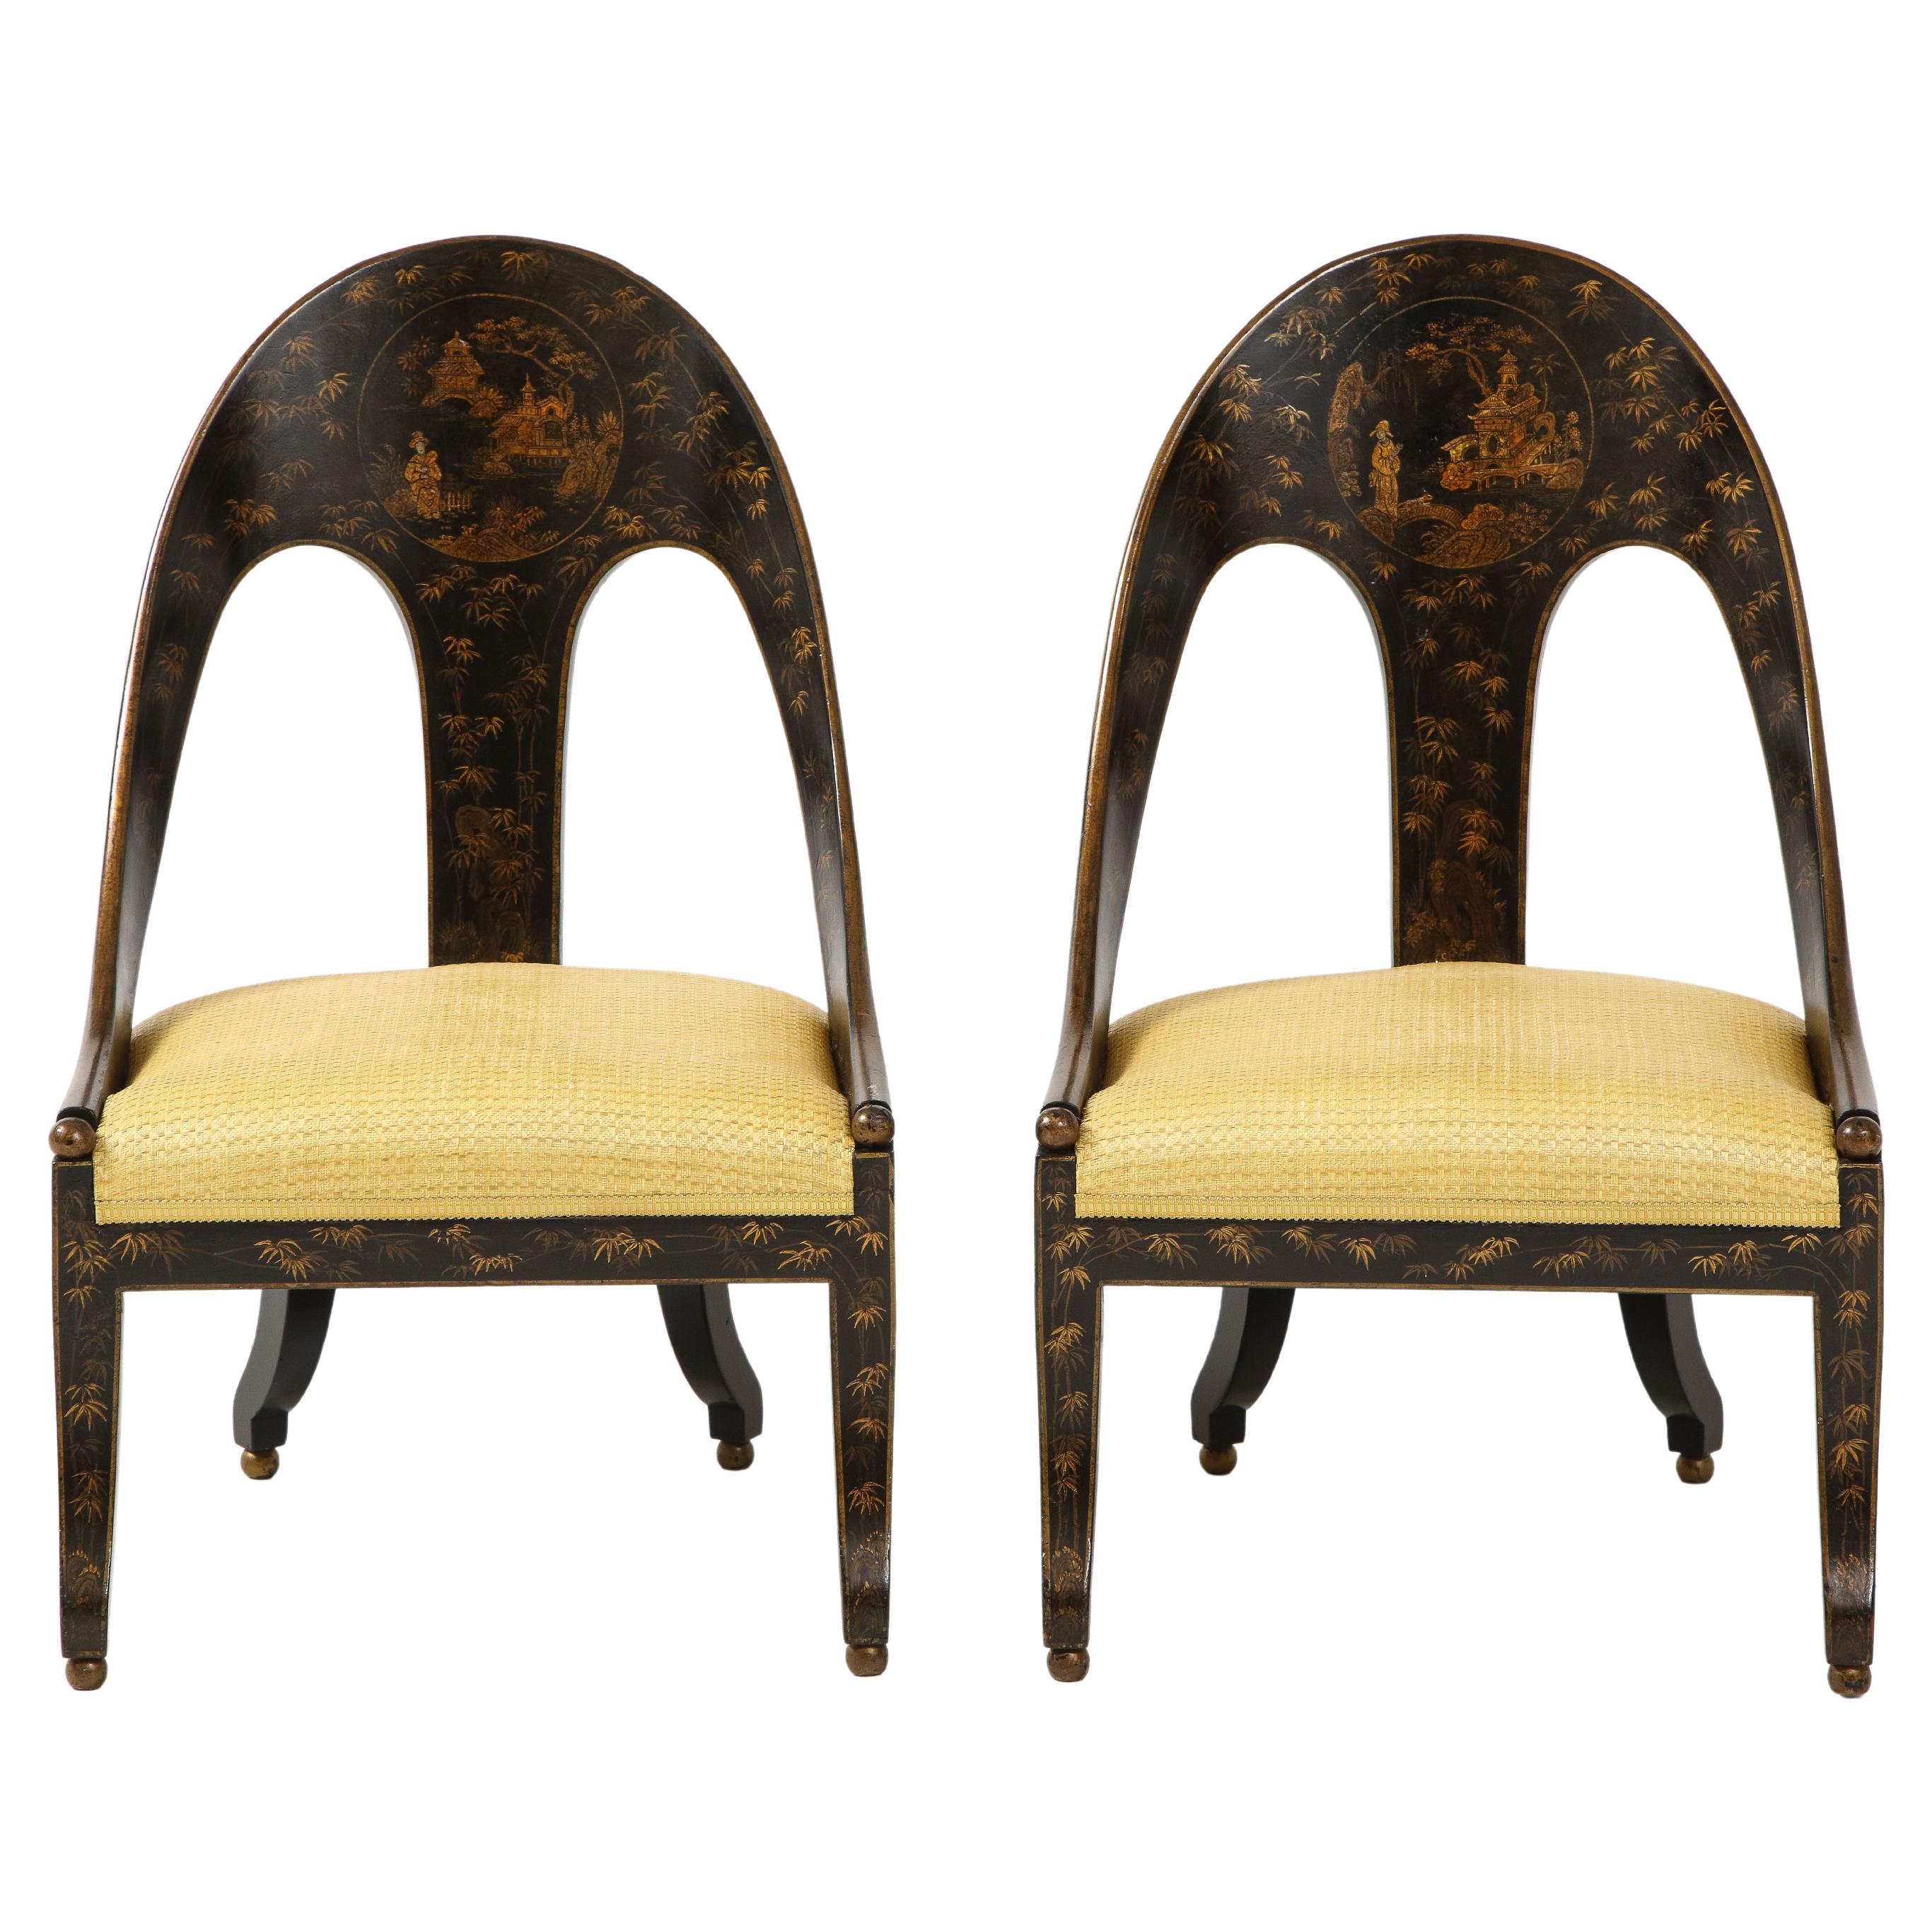 Fine pair of chinoiserie decorated Regency style spoon chairs of typical form, the curved backs with central round panels with figures, buildings and bridges in a landscape setting, the ground decorated with shooting and flowering bamboo stands, the